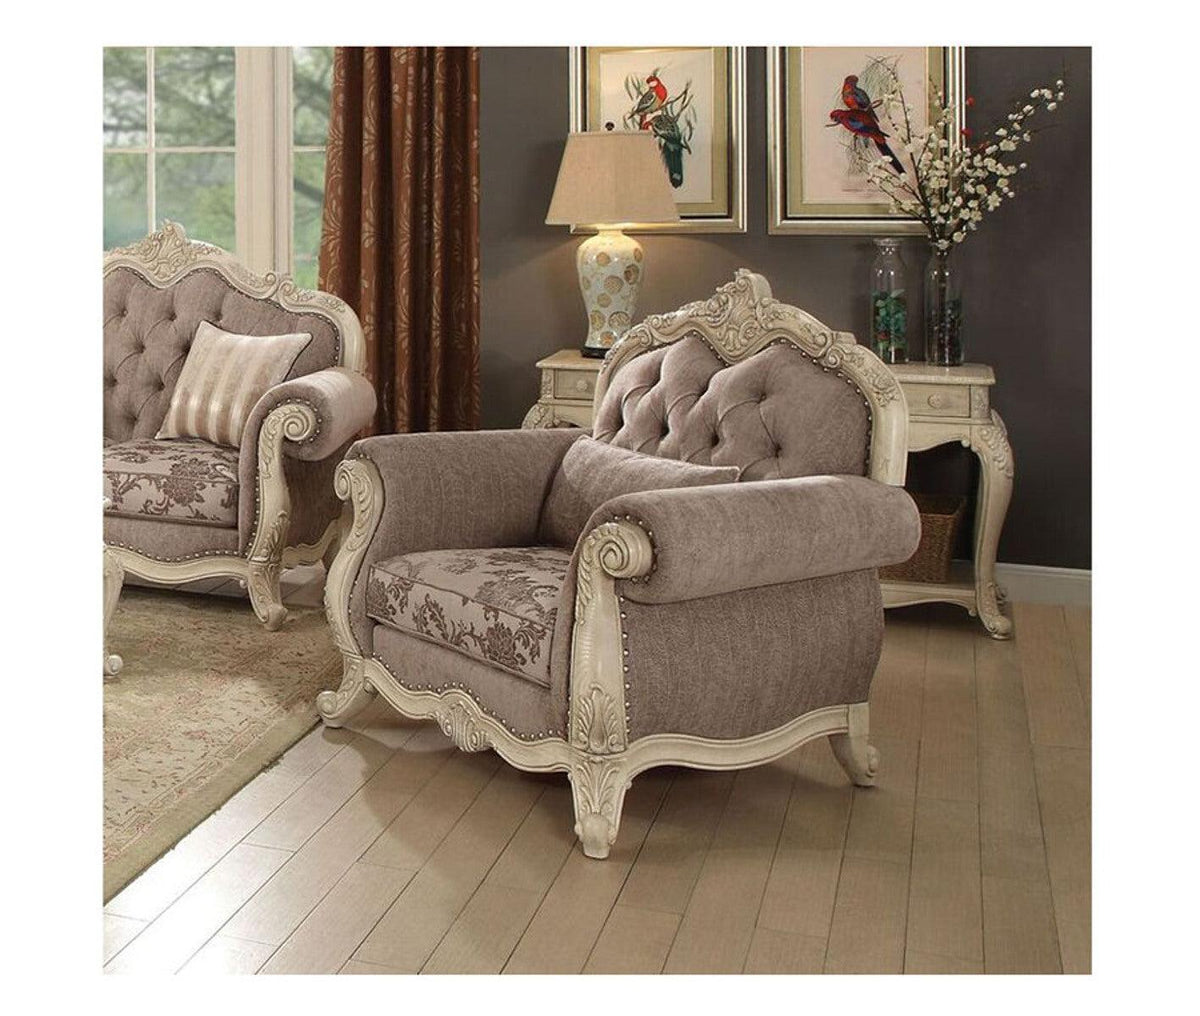 Acme Ragenardus Chair with 1 Pillow in Gray Fabric & Antique White 56022  Las Vegas Furniture Stores